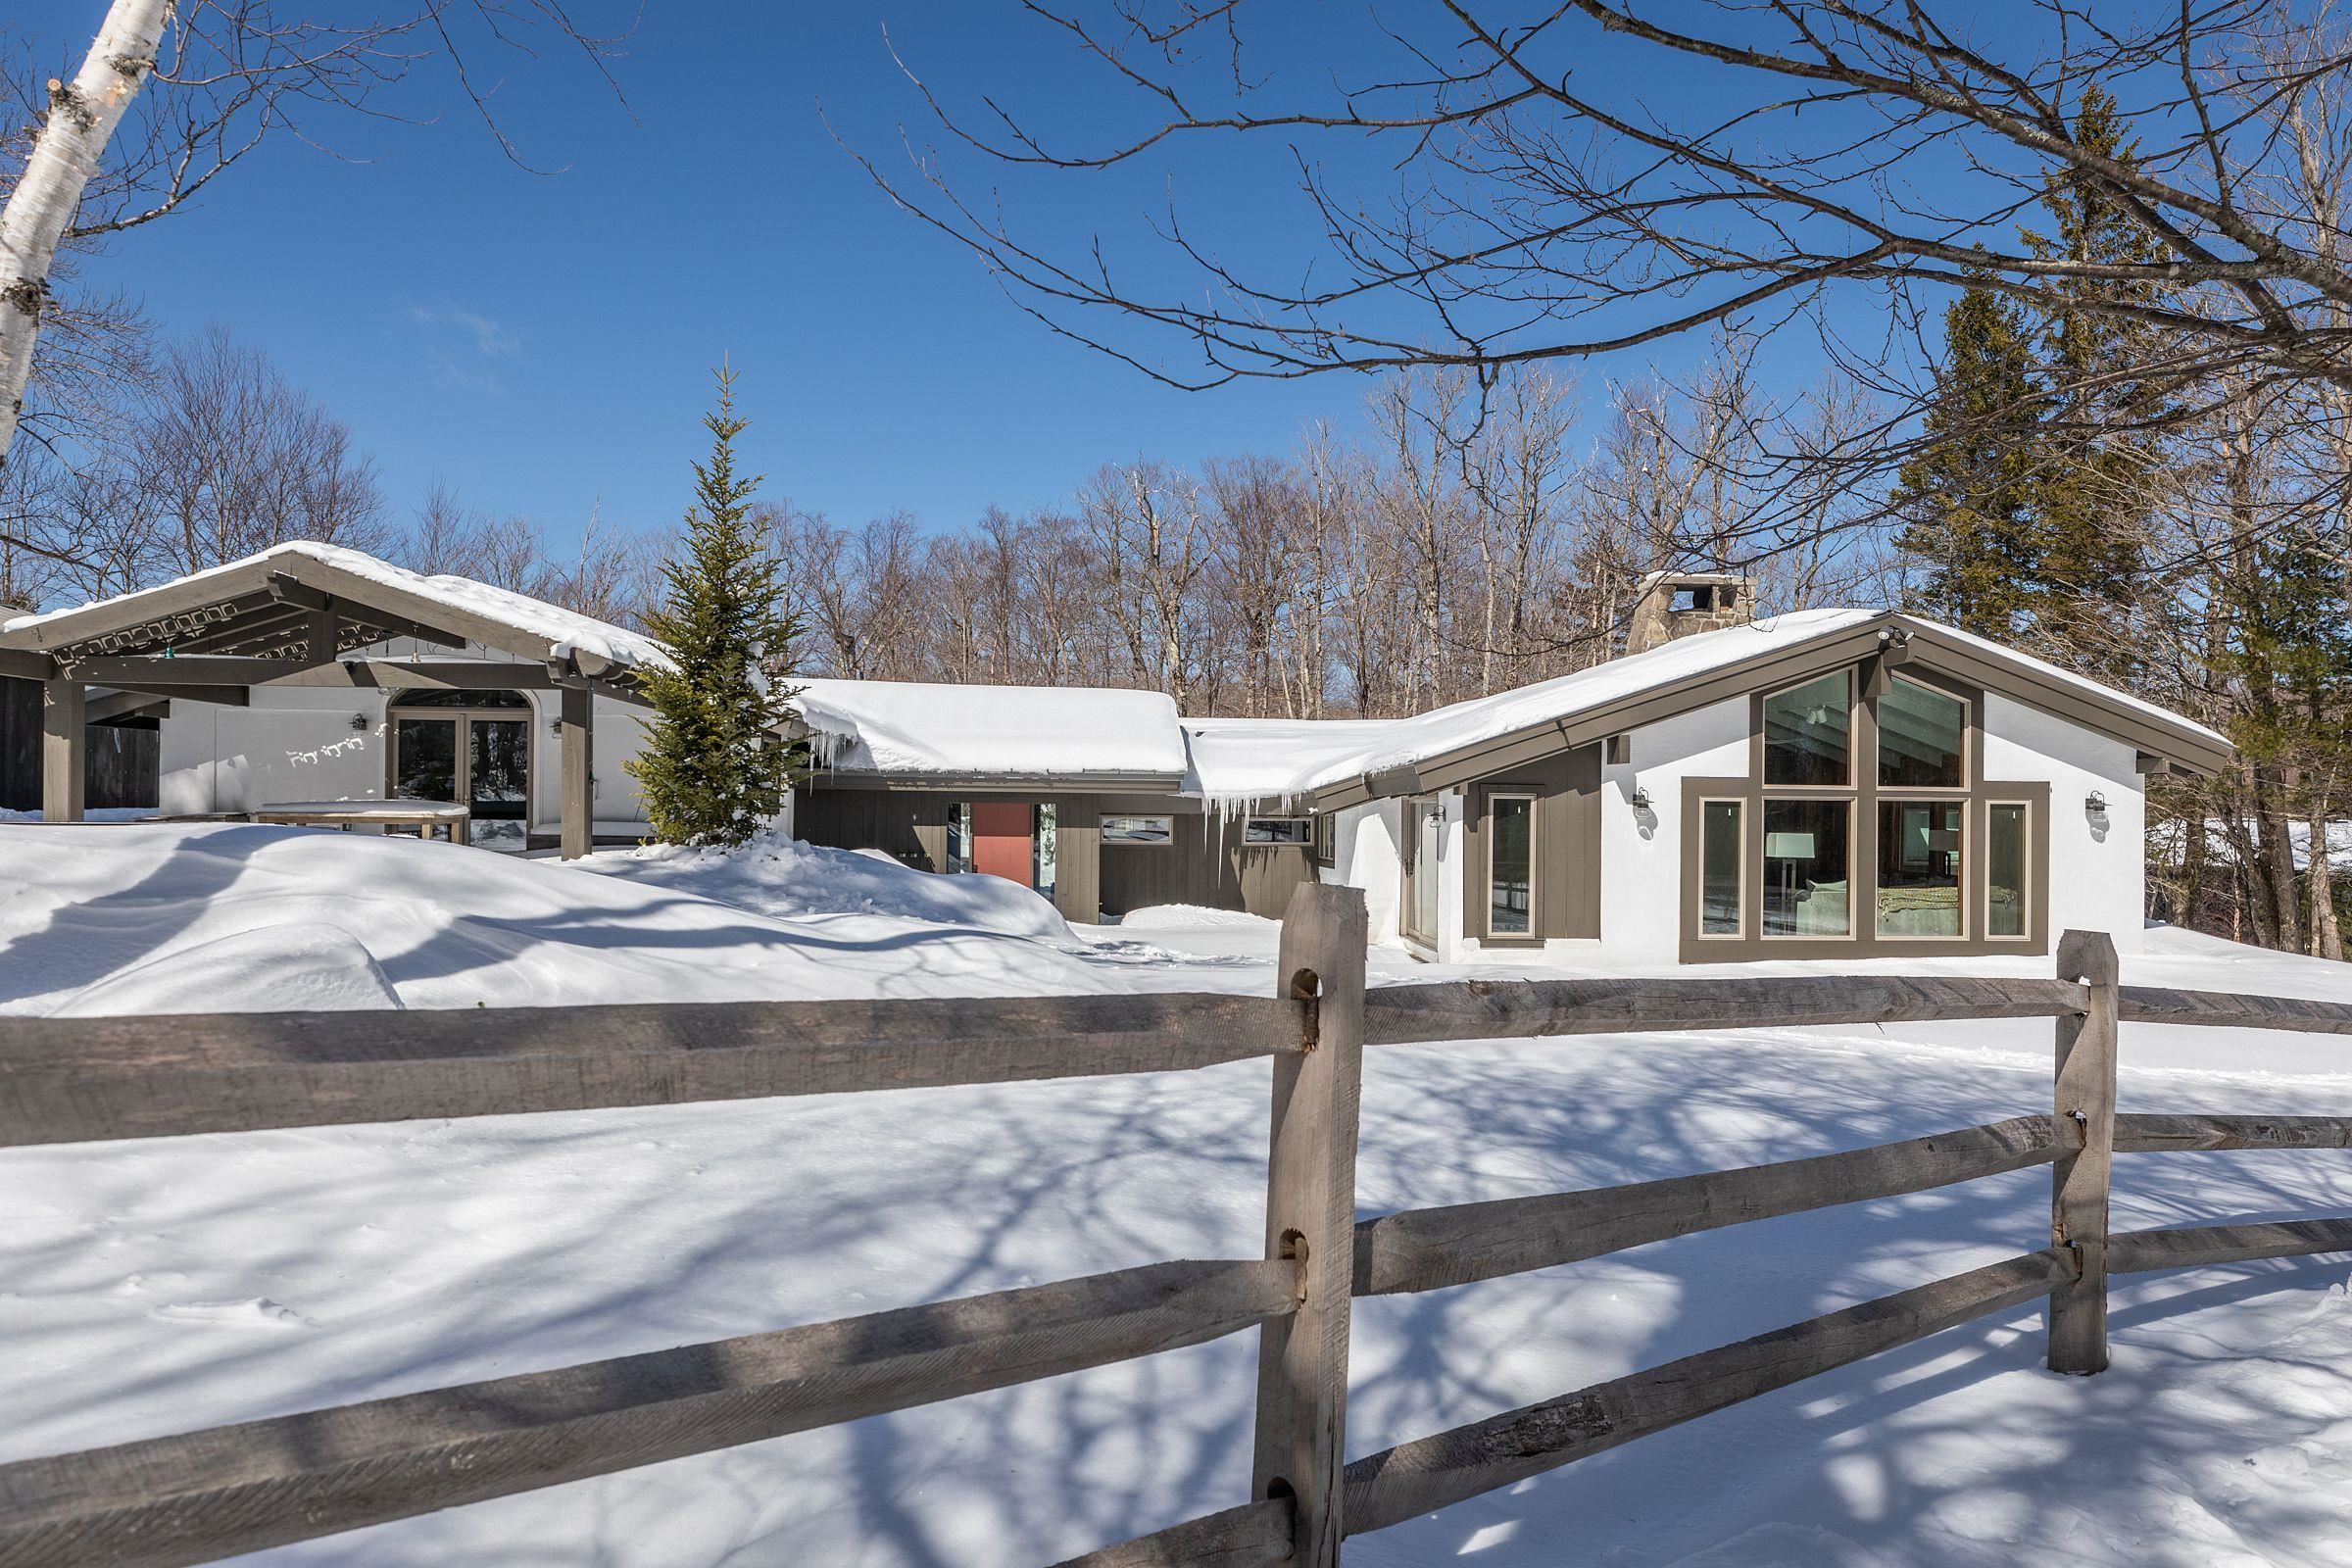 Enjoy your charming, completely renovated, ski...